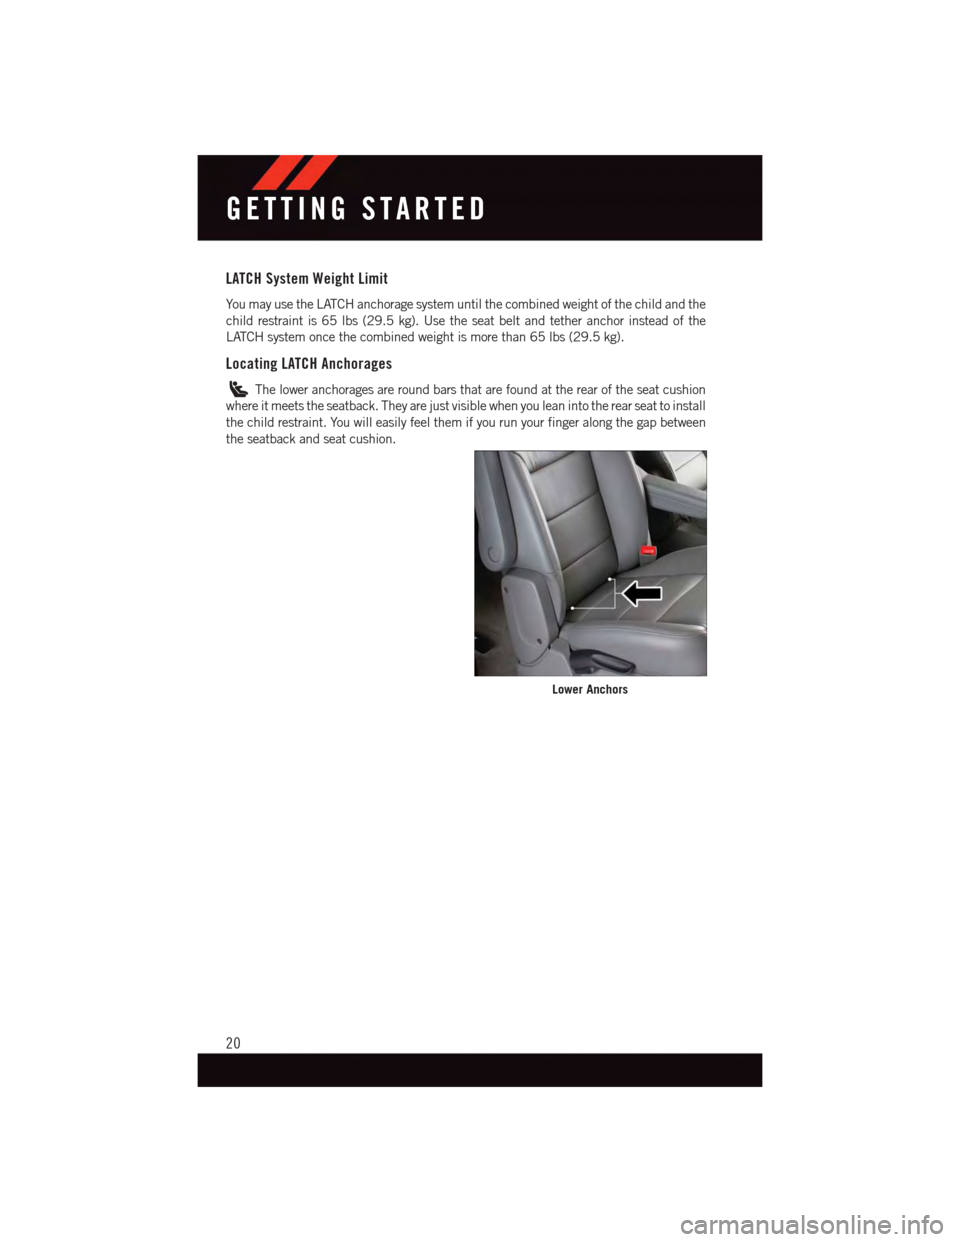 DODGE DURANGO 2015 3.G User Guide LATCH System Weight Limit
Yo u m a y u s e t h e L AT C H a n c h o r a g e s y s t e m u n t i l t h e c o m b i n e d w e i g h t o f t h e c h i l d a n d t h e
child restraint is 65 lbs (29.5 kg).